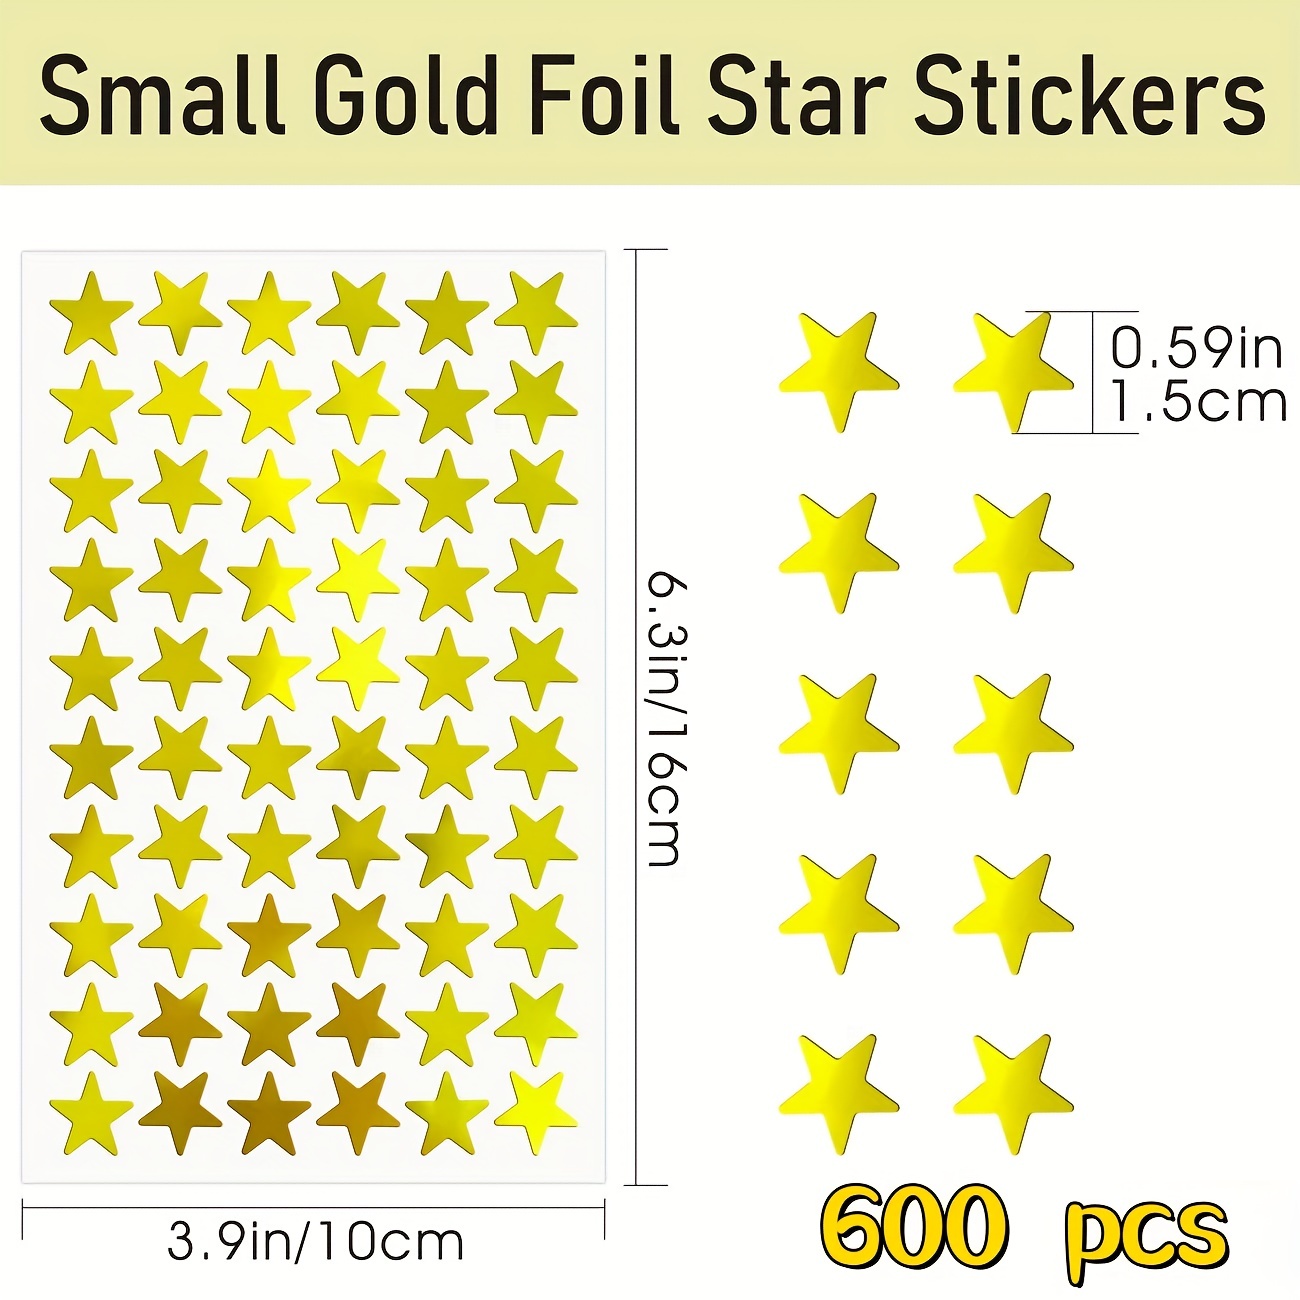  600Pcs Holographic Gold Star Stickers, Sparkly Foil Small Star  Stickers for Kids Reward, Behavior Chart, Student Planner, Classroom  Teacher Supplies(1 Diameter) : Office Products